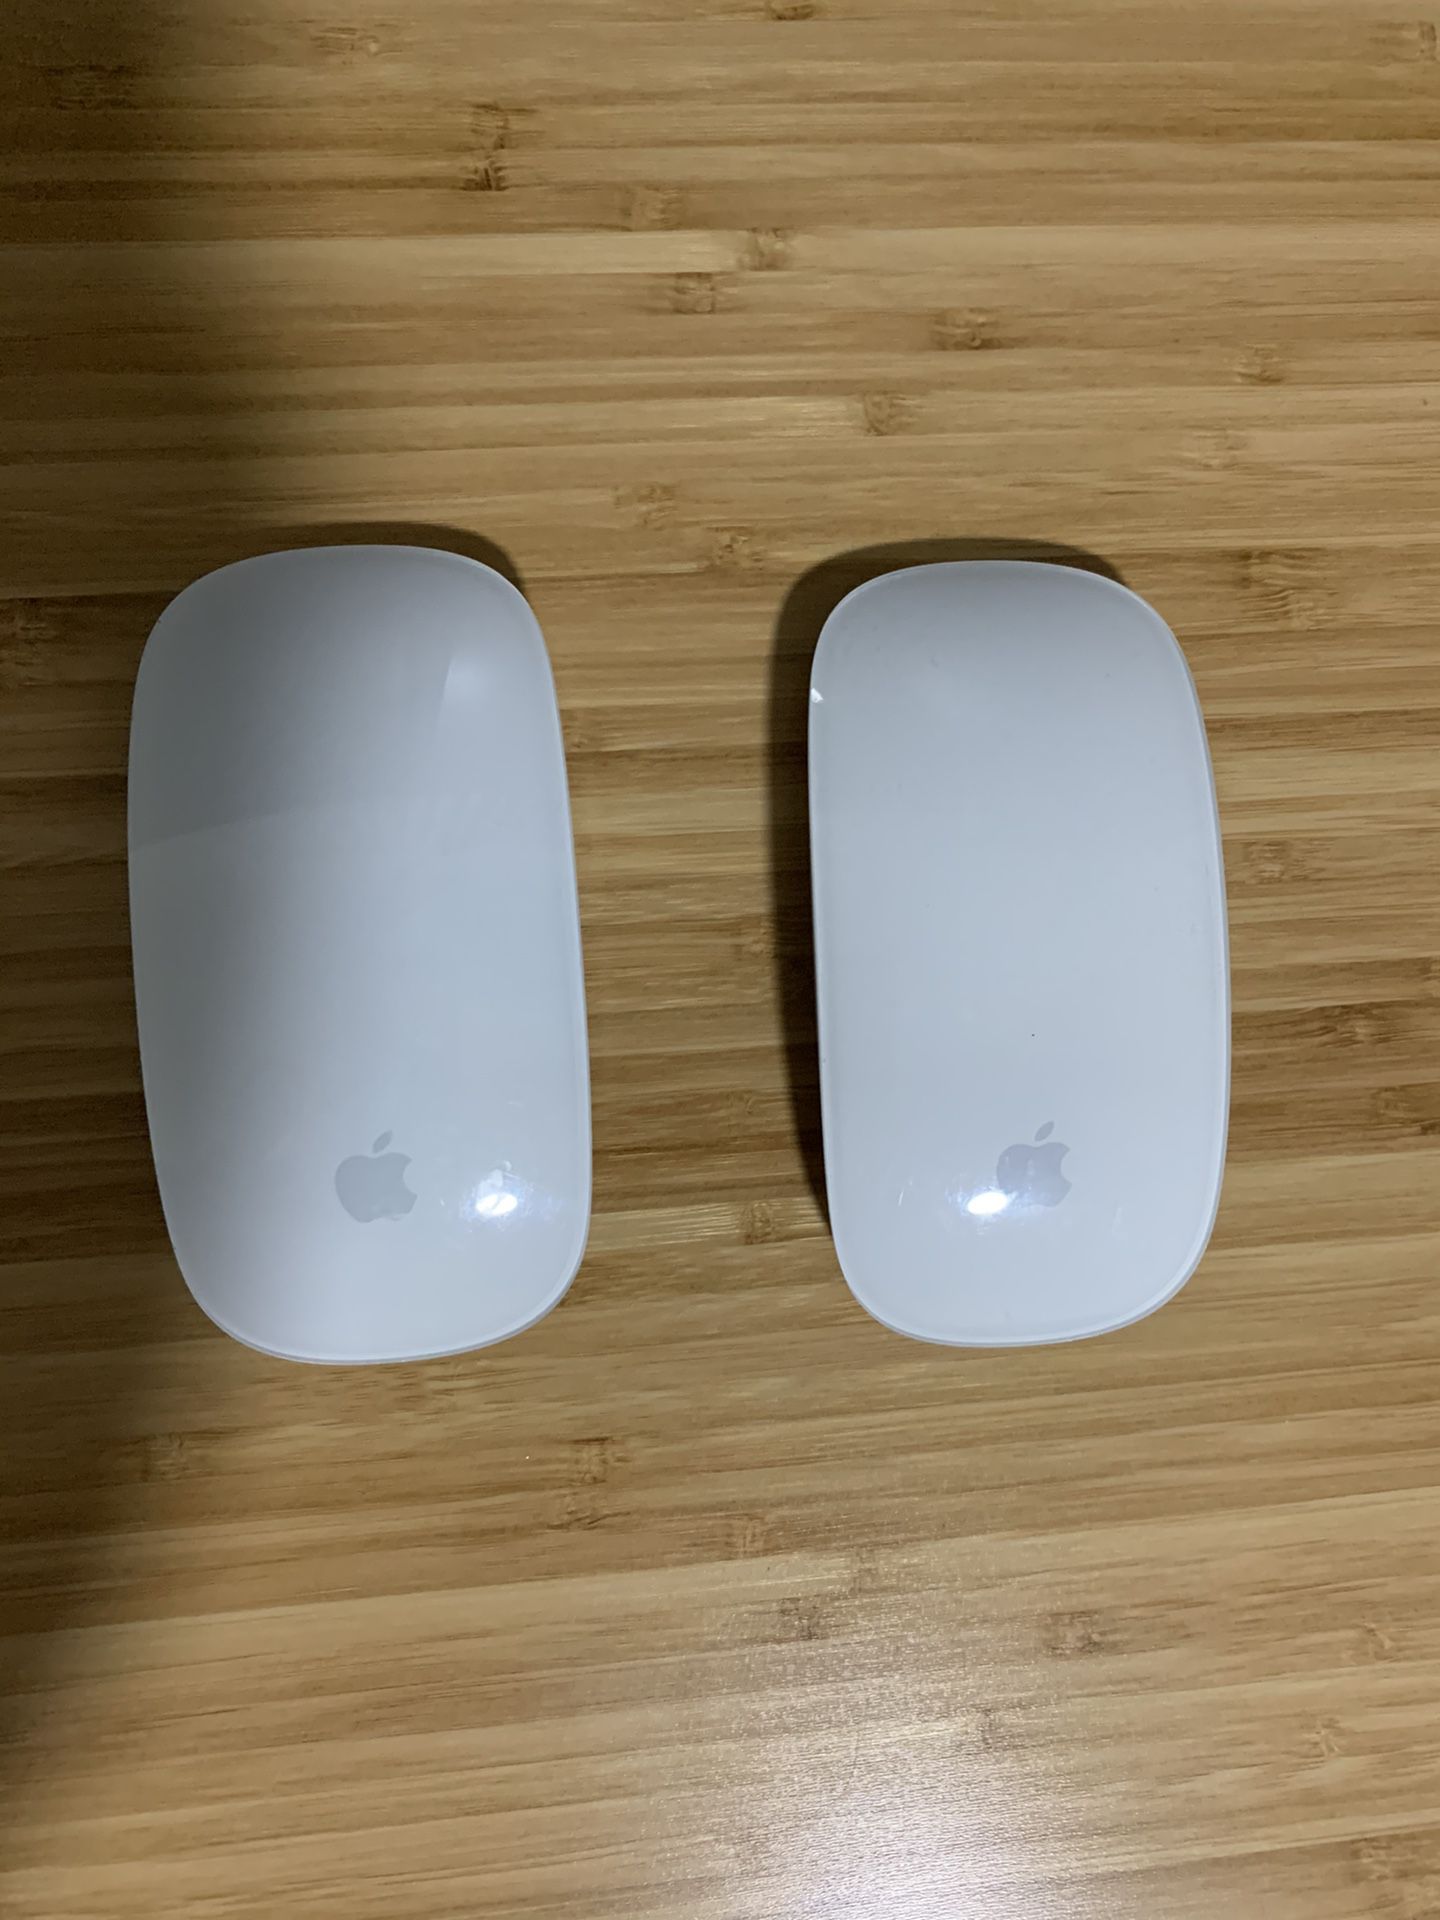 2 Apple Wireless Mouse